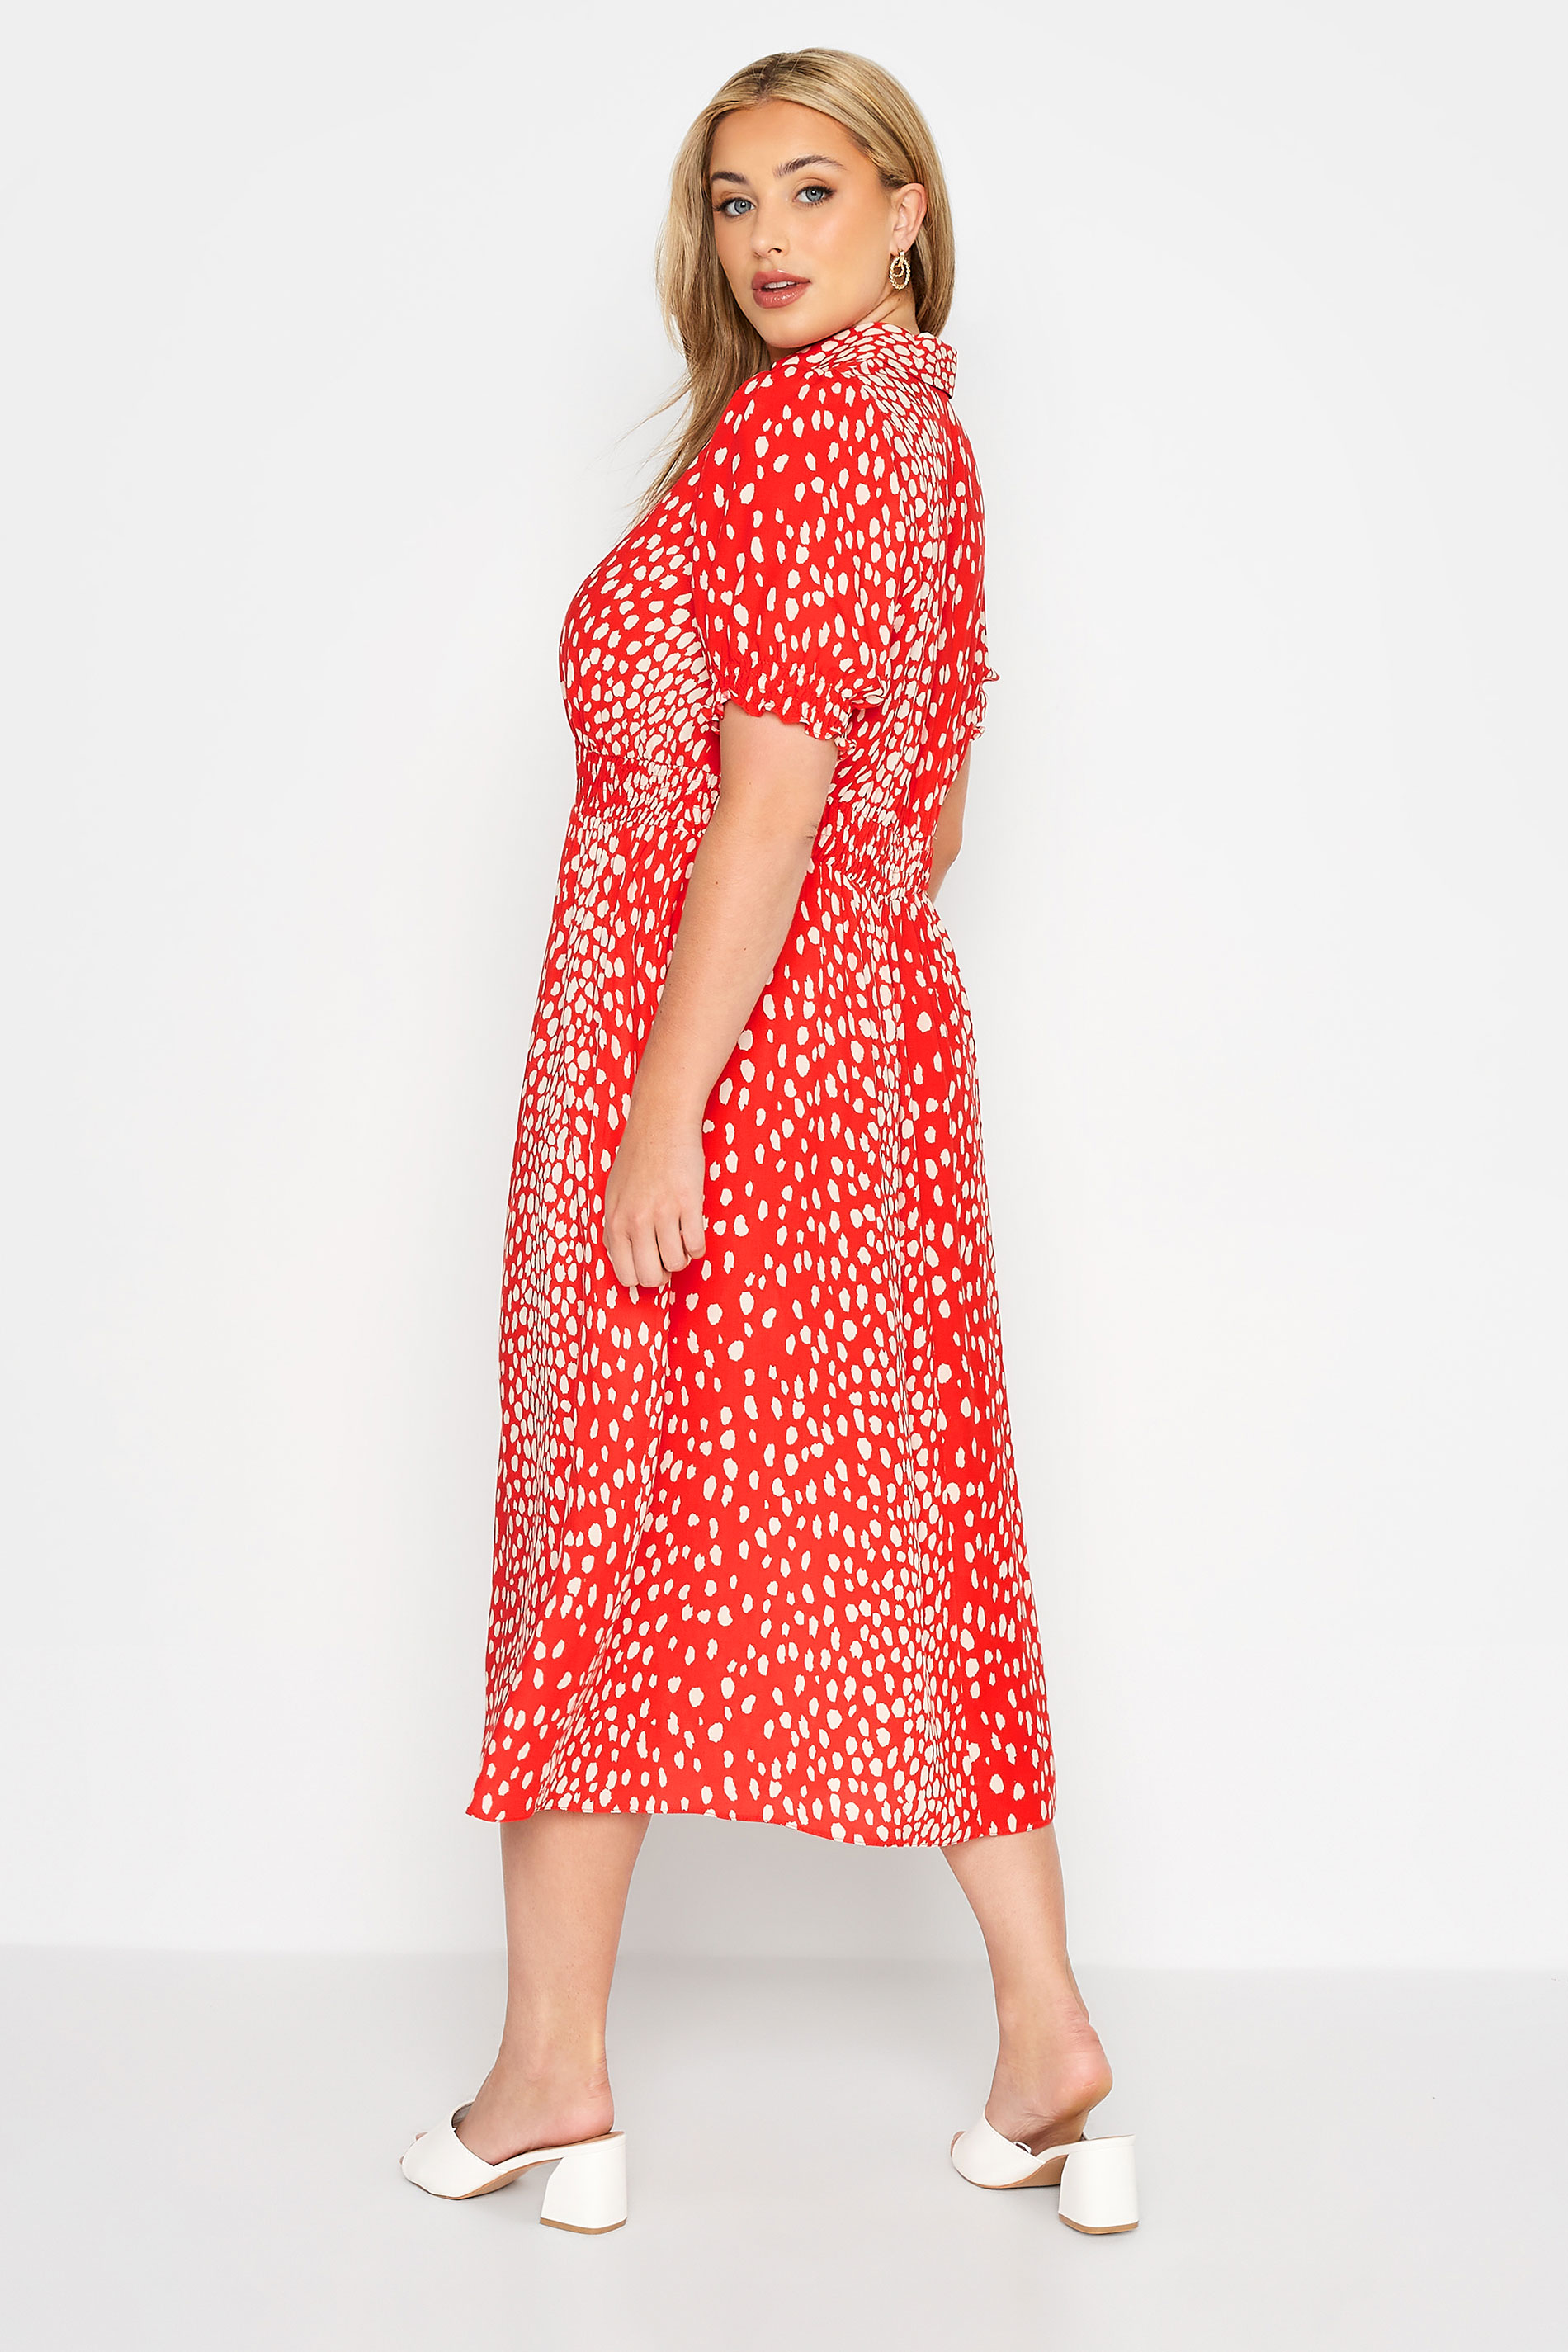 YOURS LONDON Plus Size Red Dalmatian Print Shirred Waist Dress | Yours Clothing 3